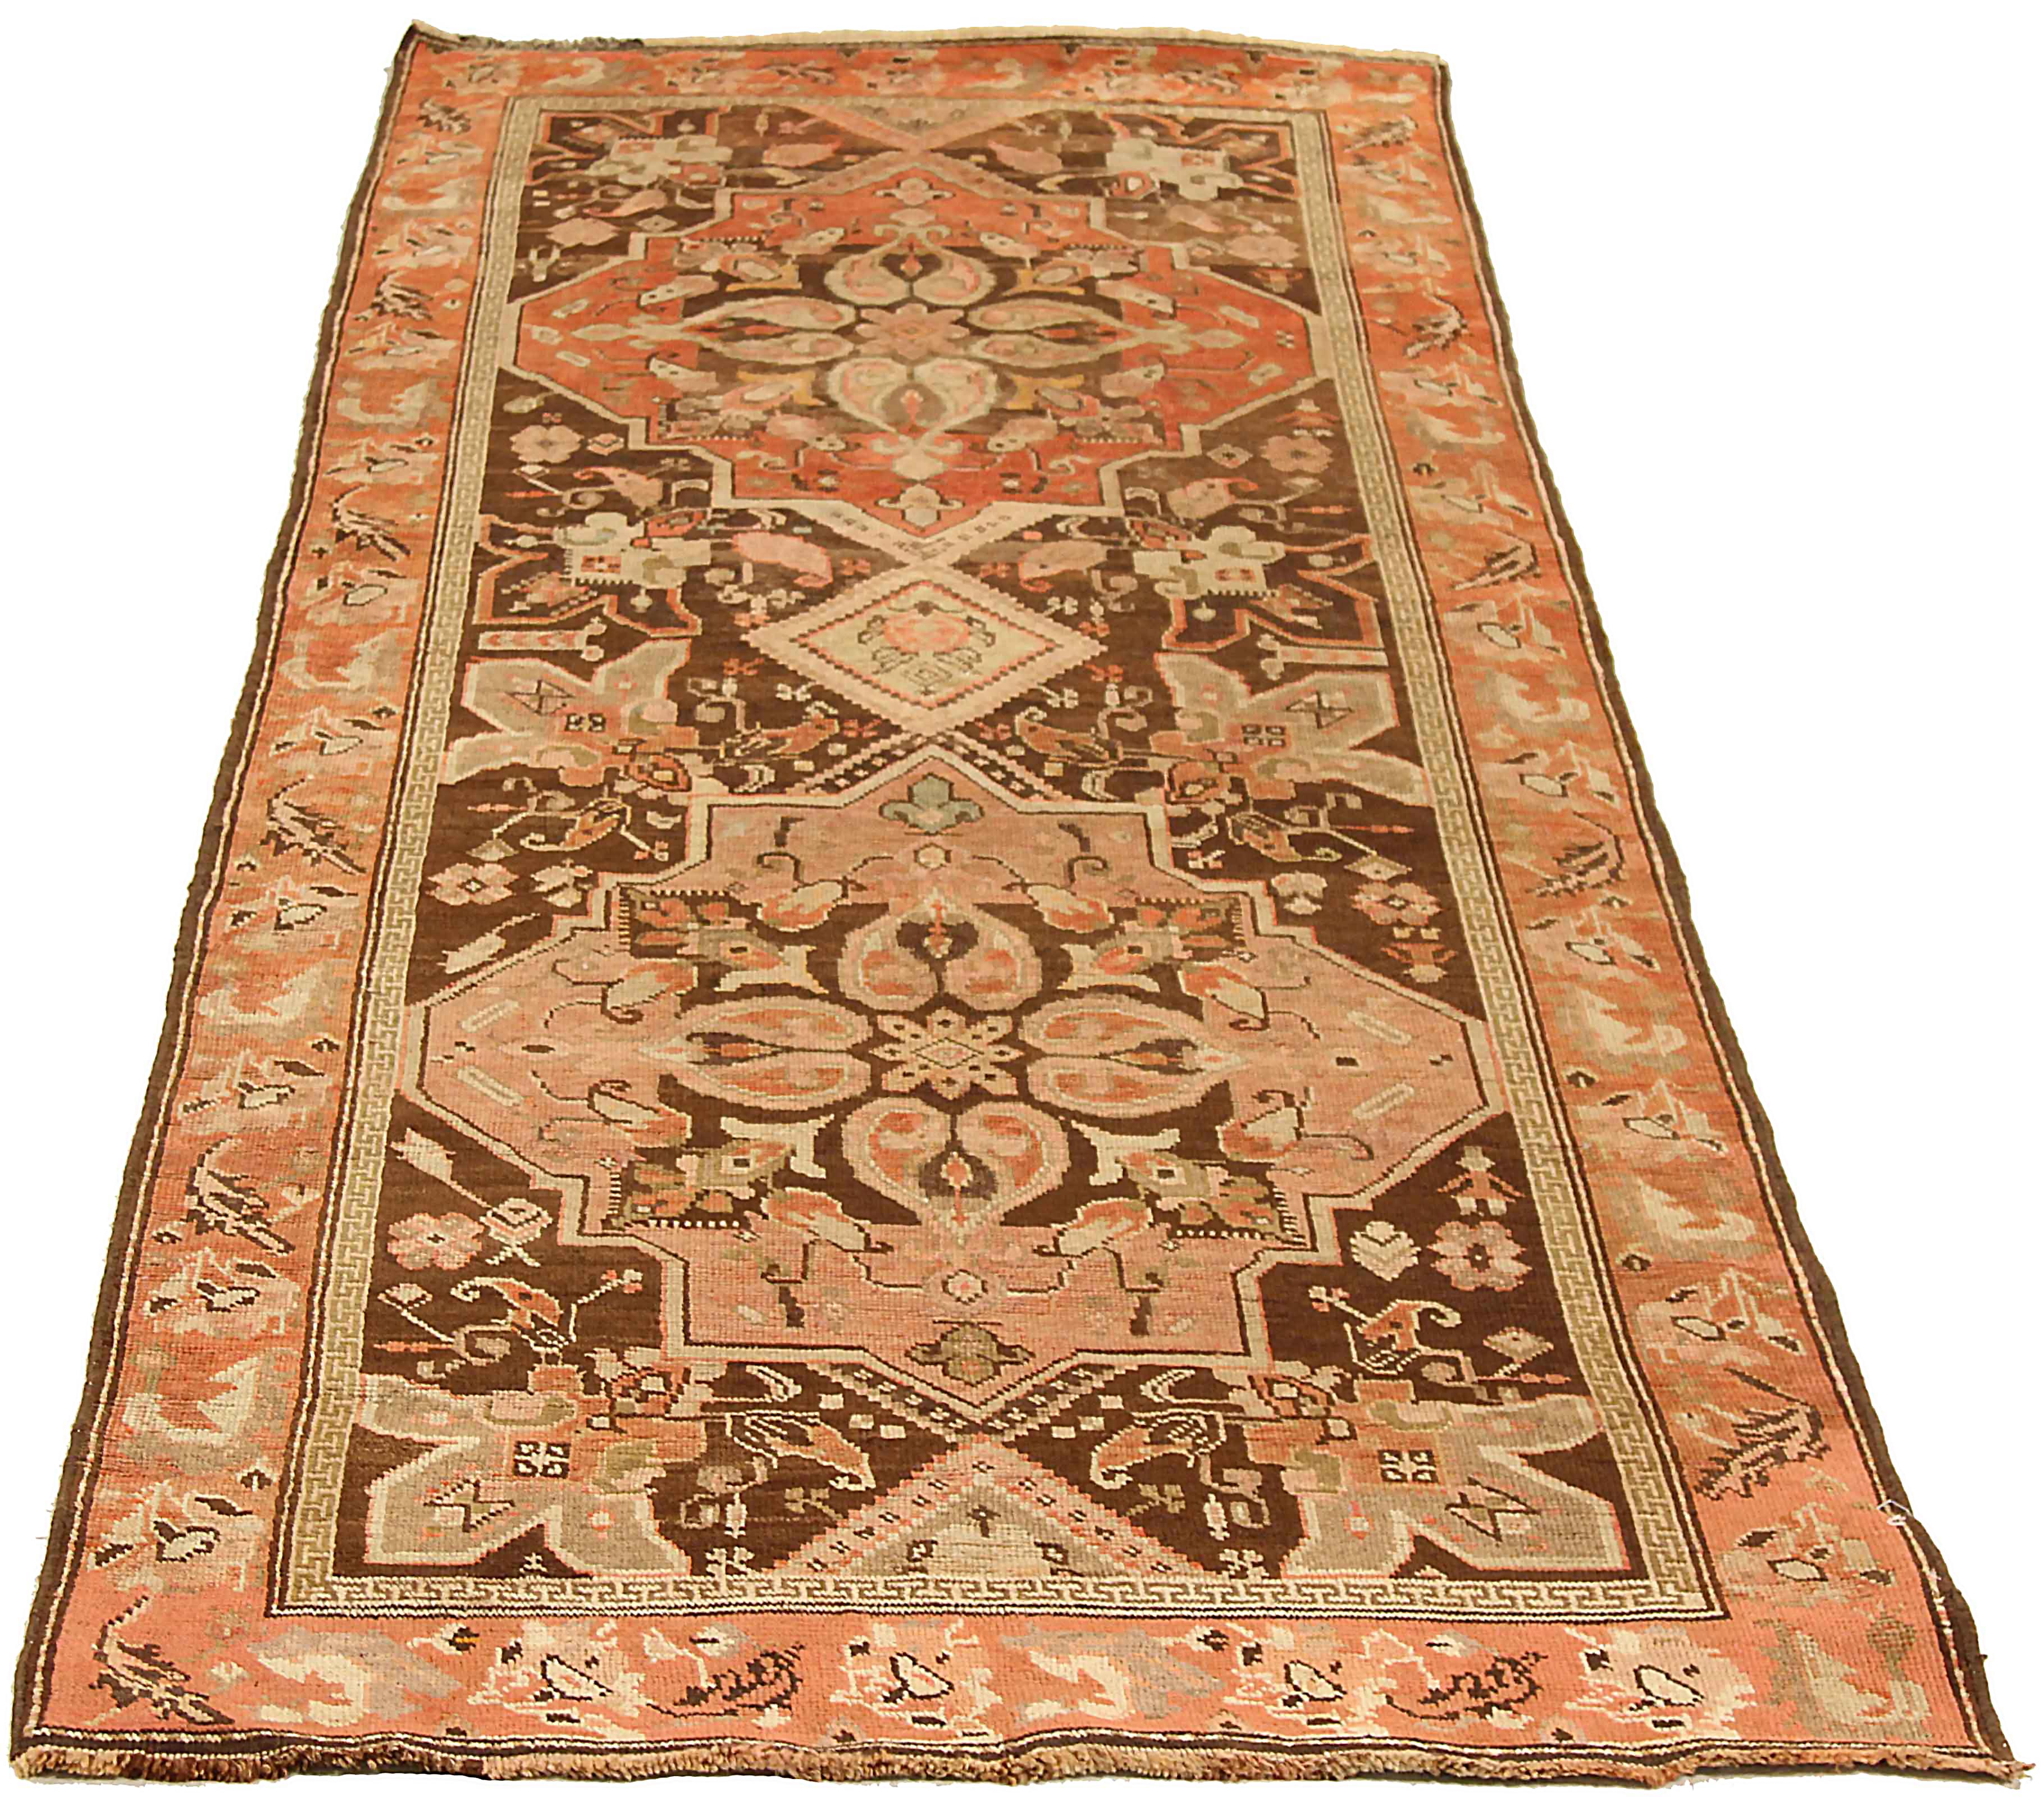 Antique Persian runner rug handwoven from the finest sheep’s wool and colored with all-natural vegetable dyes that are safe for humans and pets. It’s a traditional Karabagh design featuring a colored flower details on an ivory field. It’s an elegant